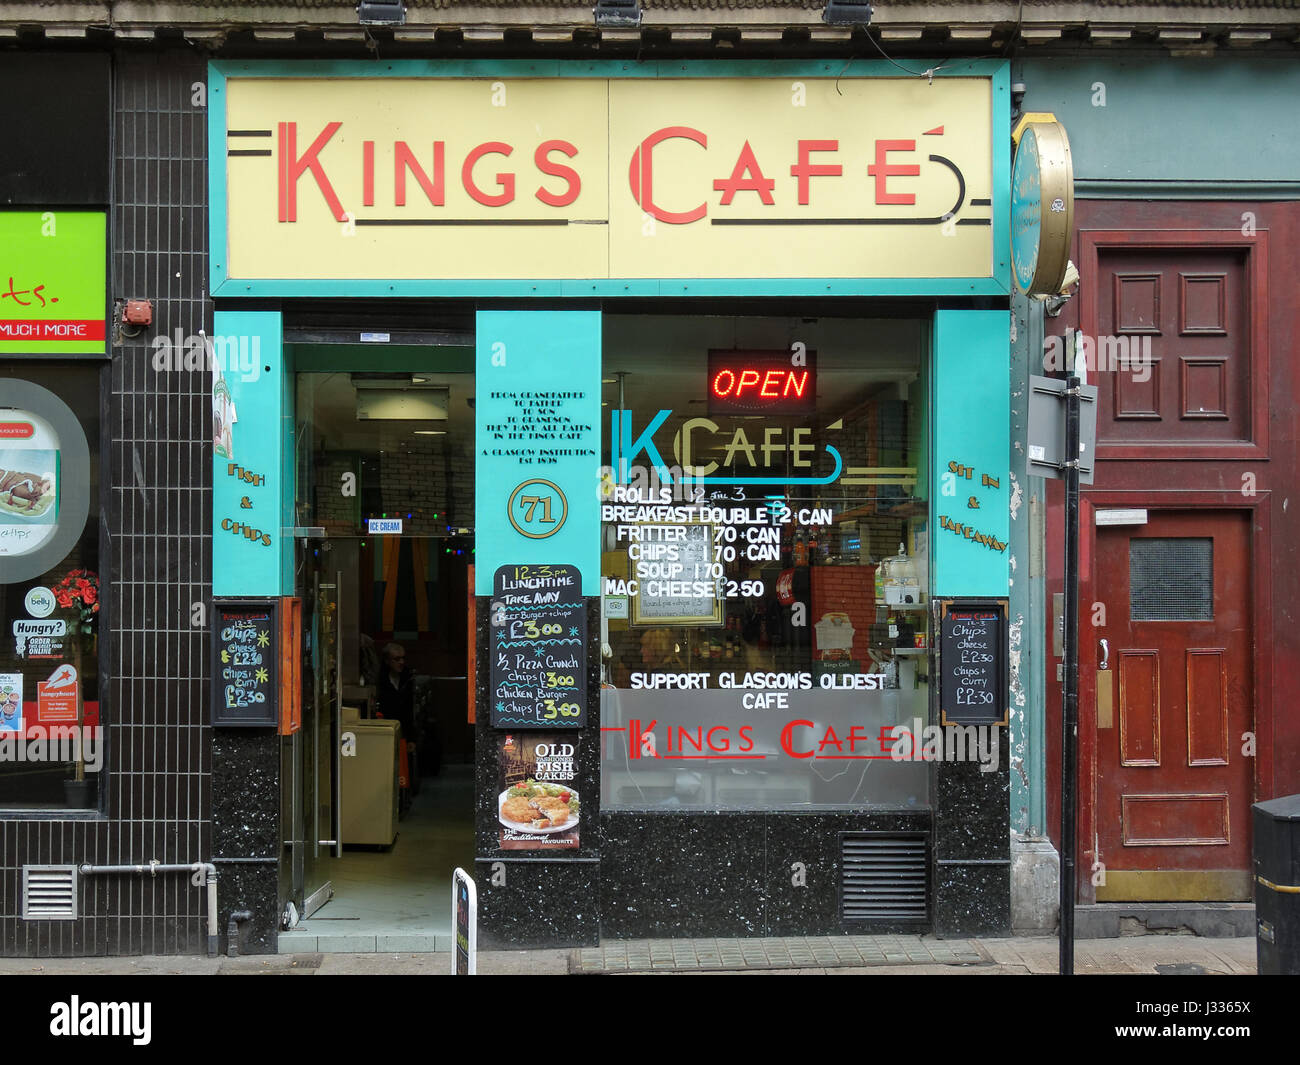 Kings Cafe Glasgow  strong claims to be Glasgow's oldest cafe Stock Photo